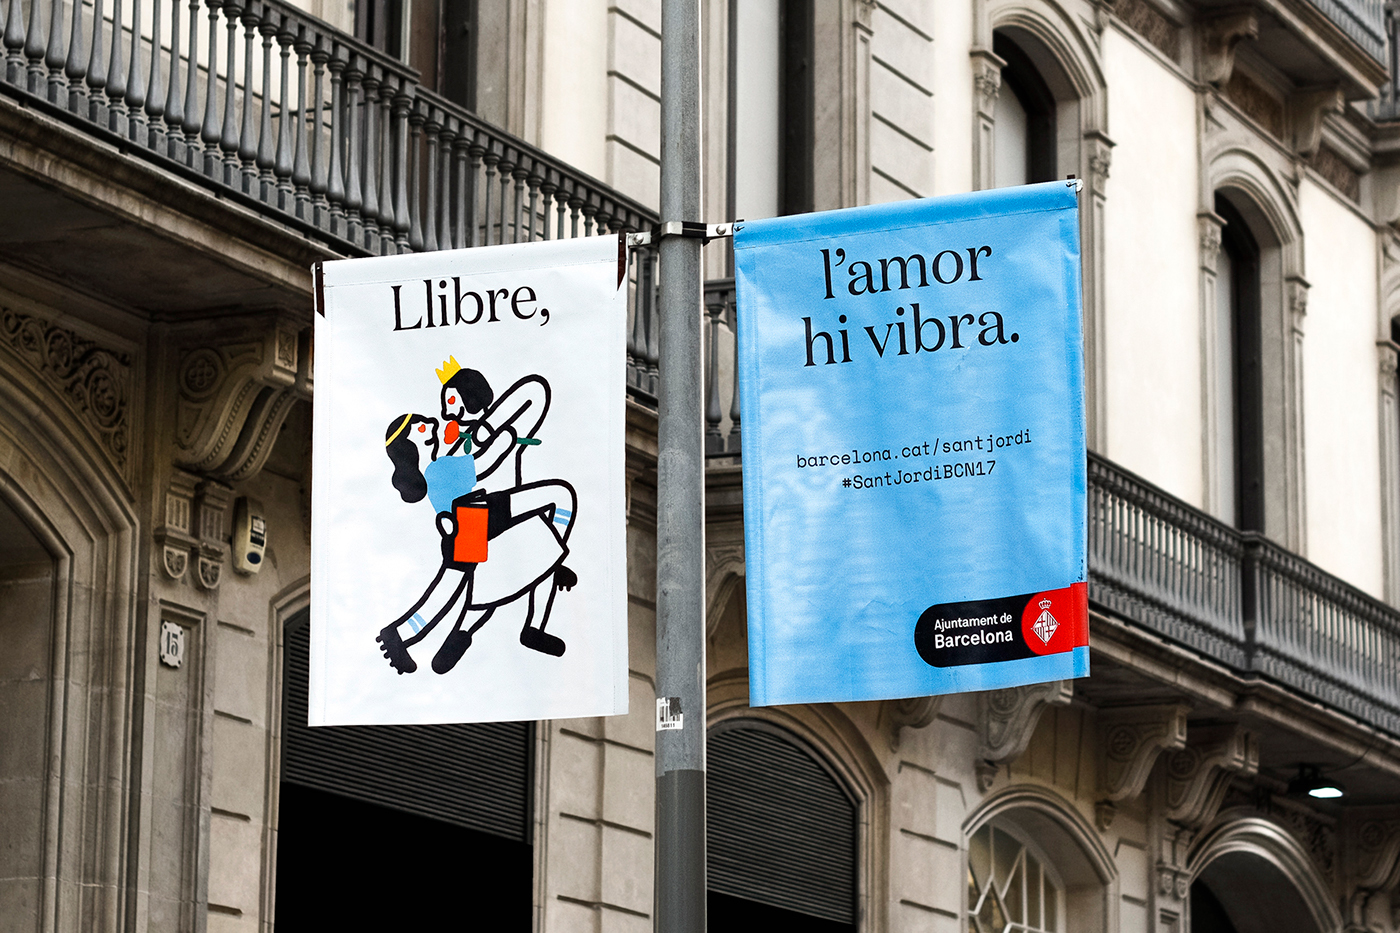 Flags designed by Requena featuring illustration by Olga Capdevila for Sant Jordi Festival 2017